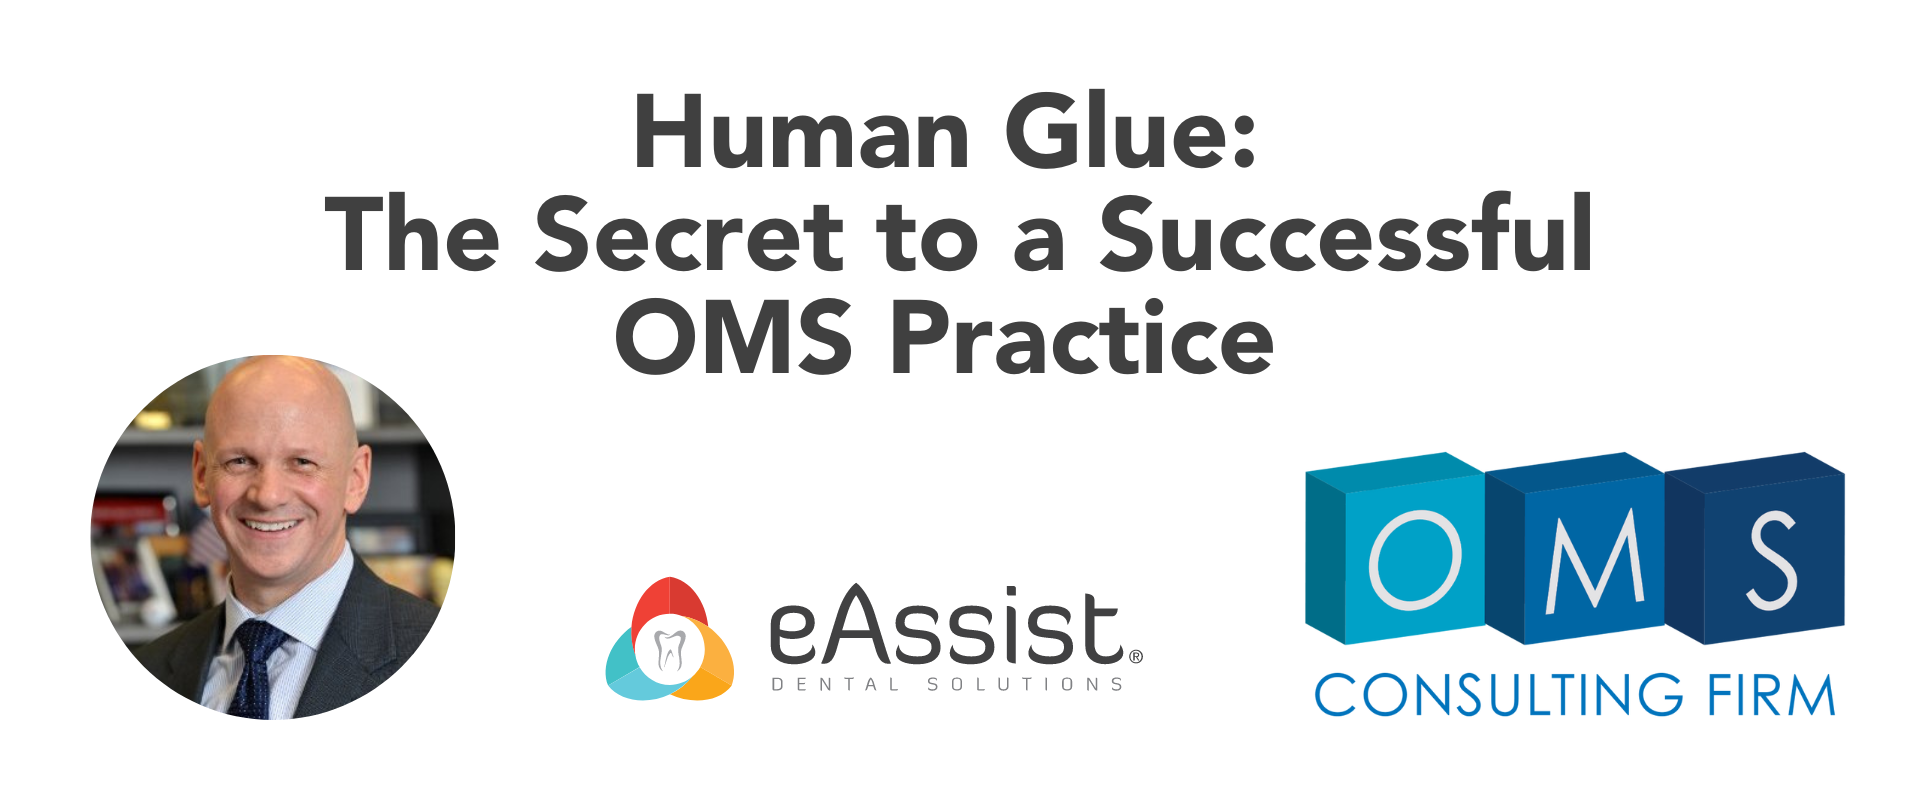 Human Glue: The Secret to a Successful OMS Practice